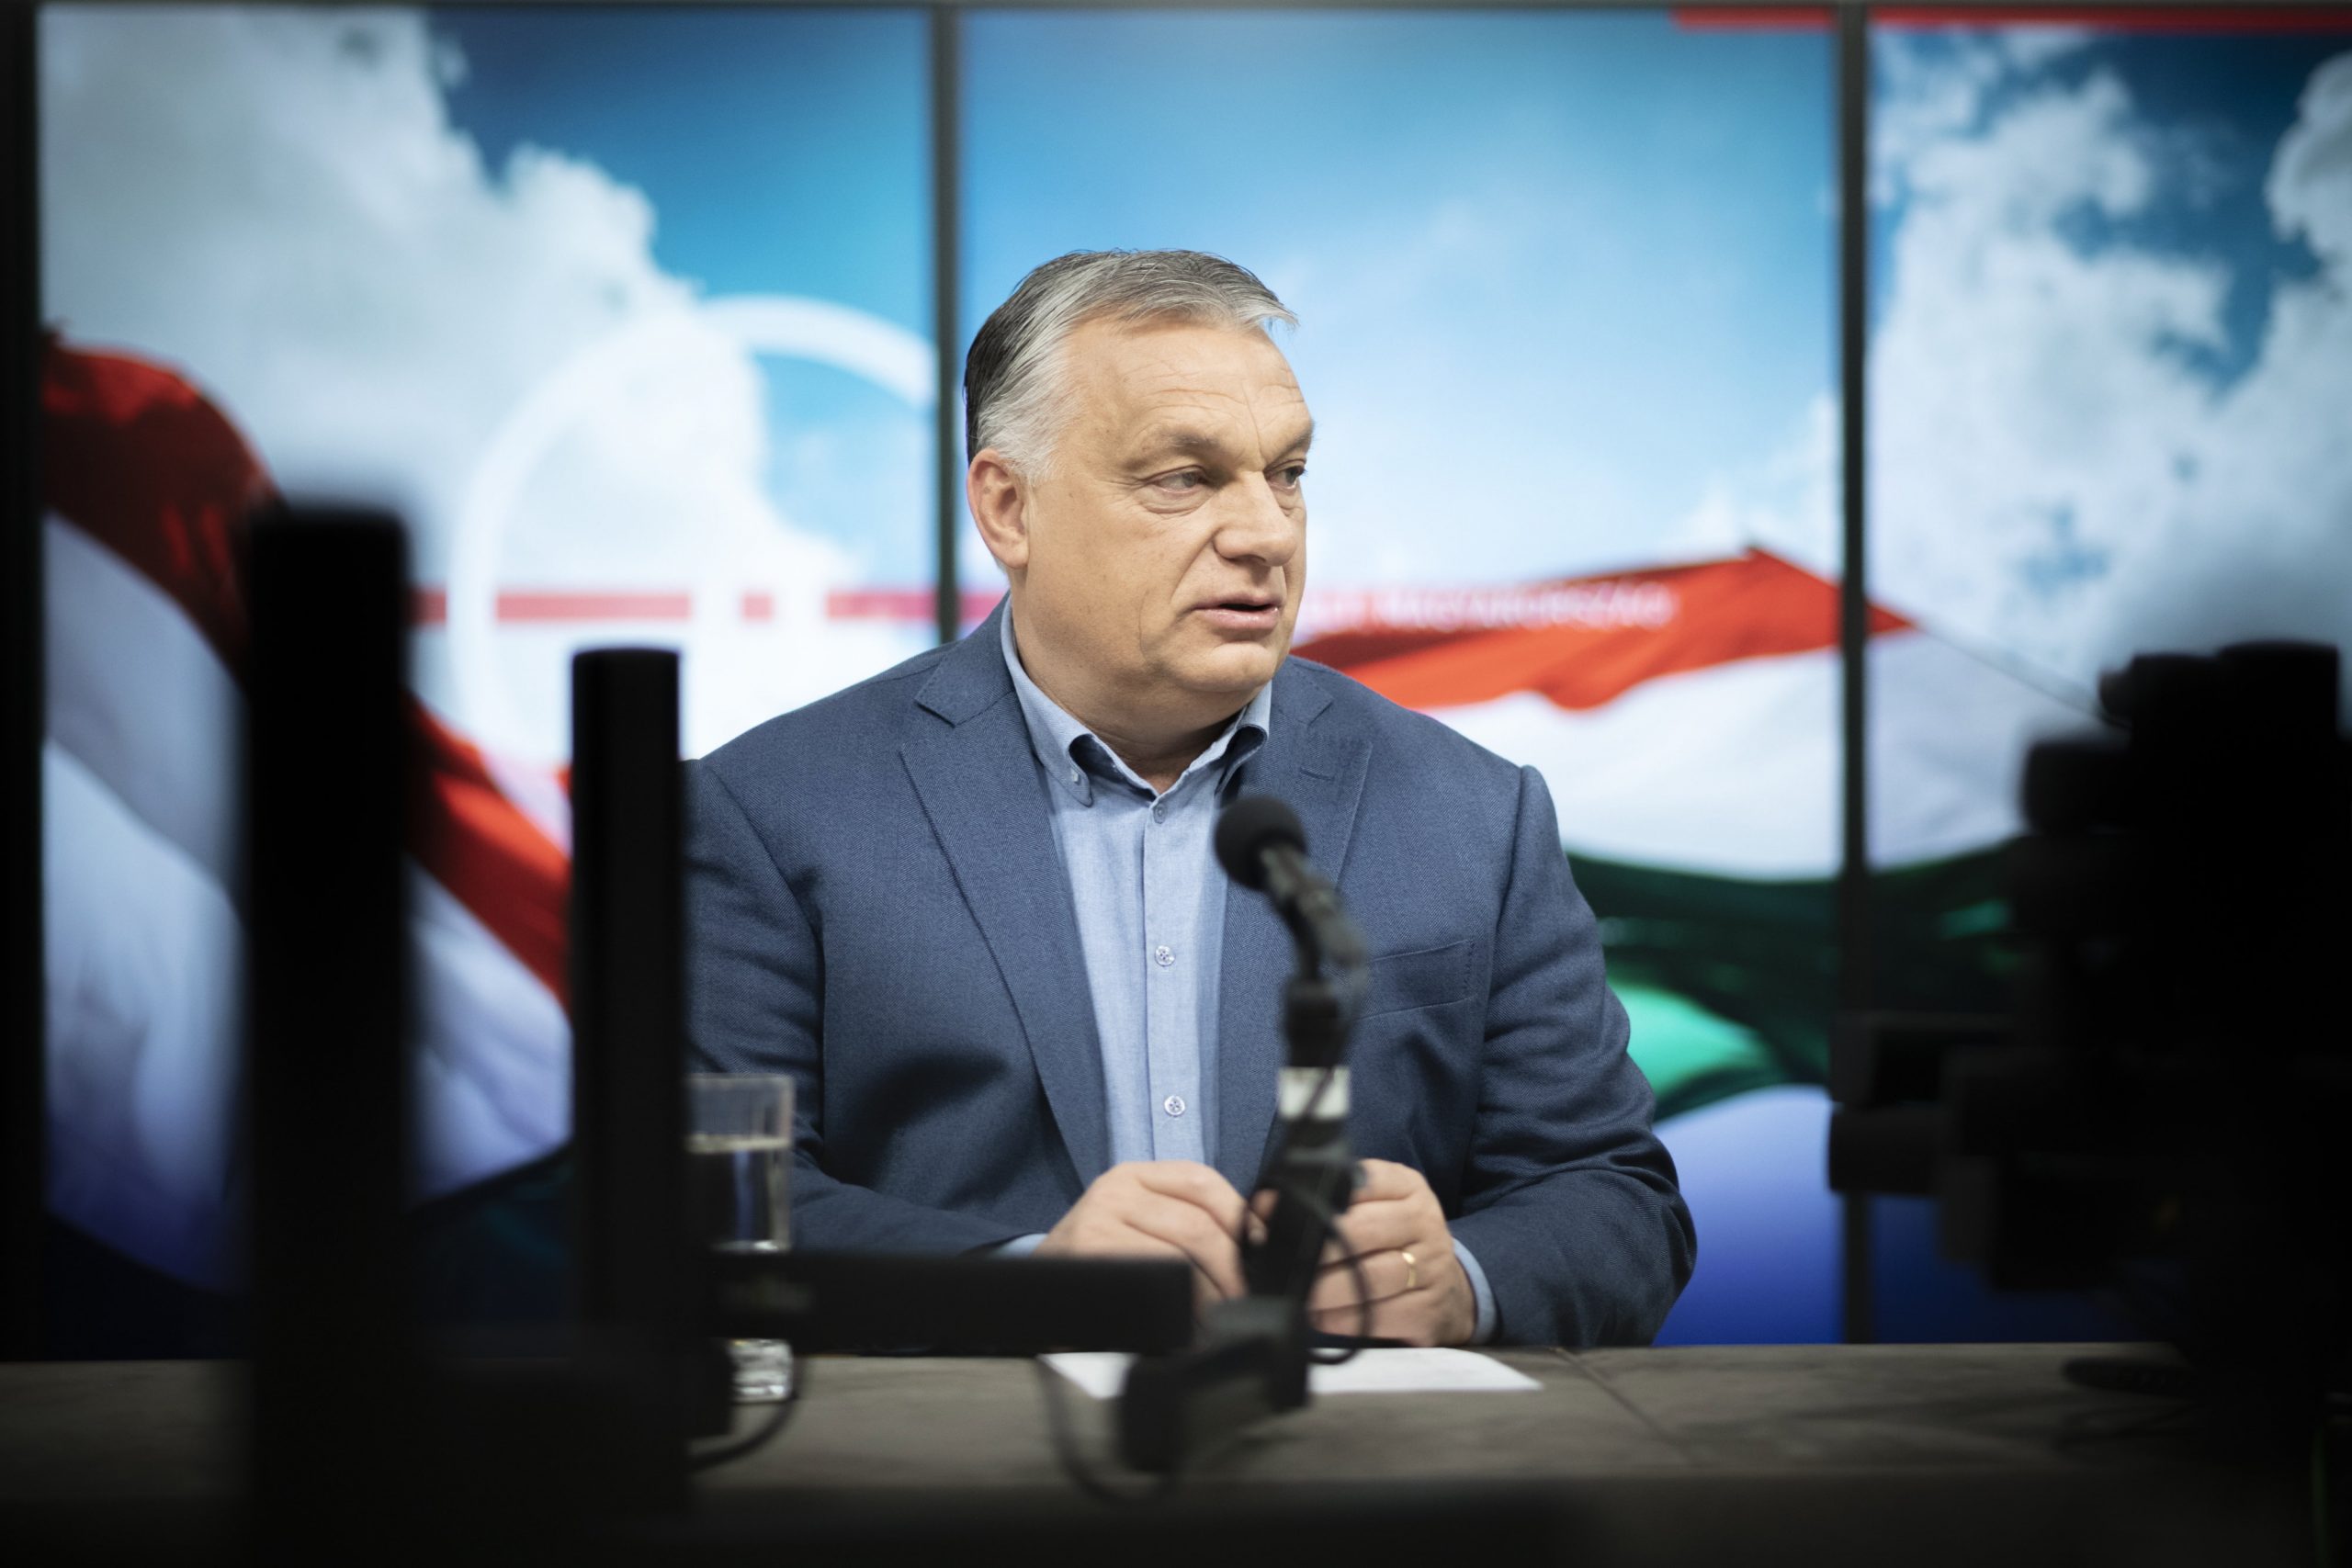 Orbán Accuses Opposition of Election Fraud